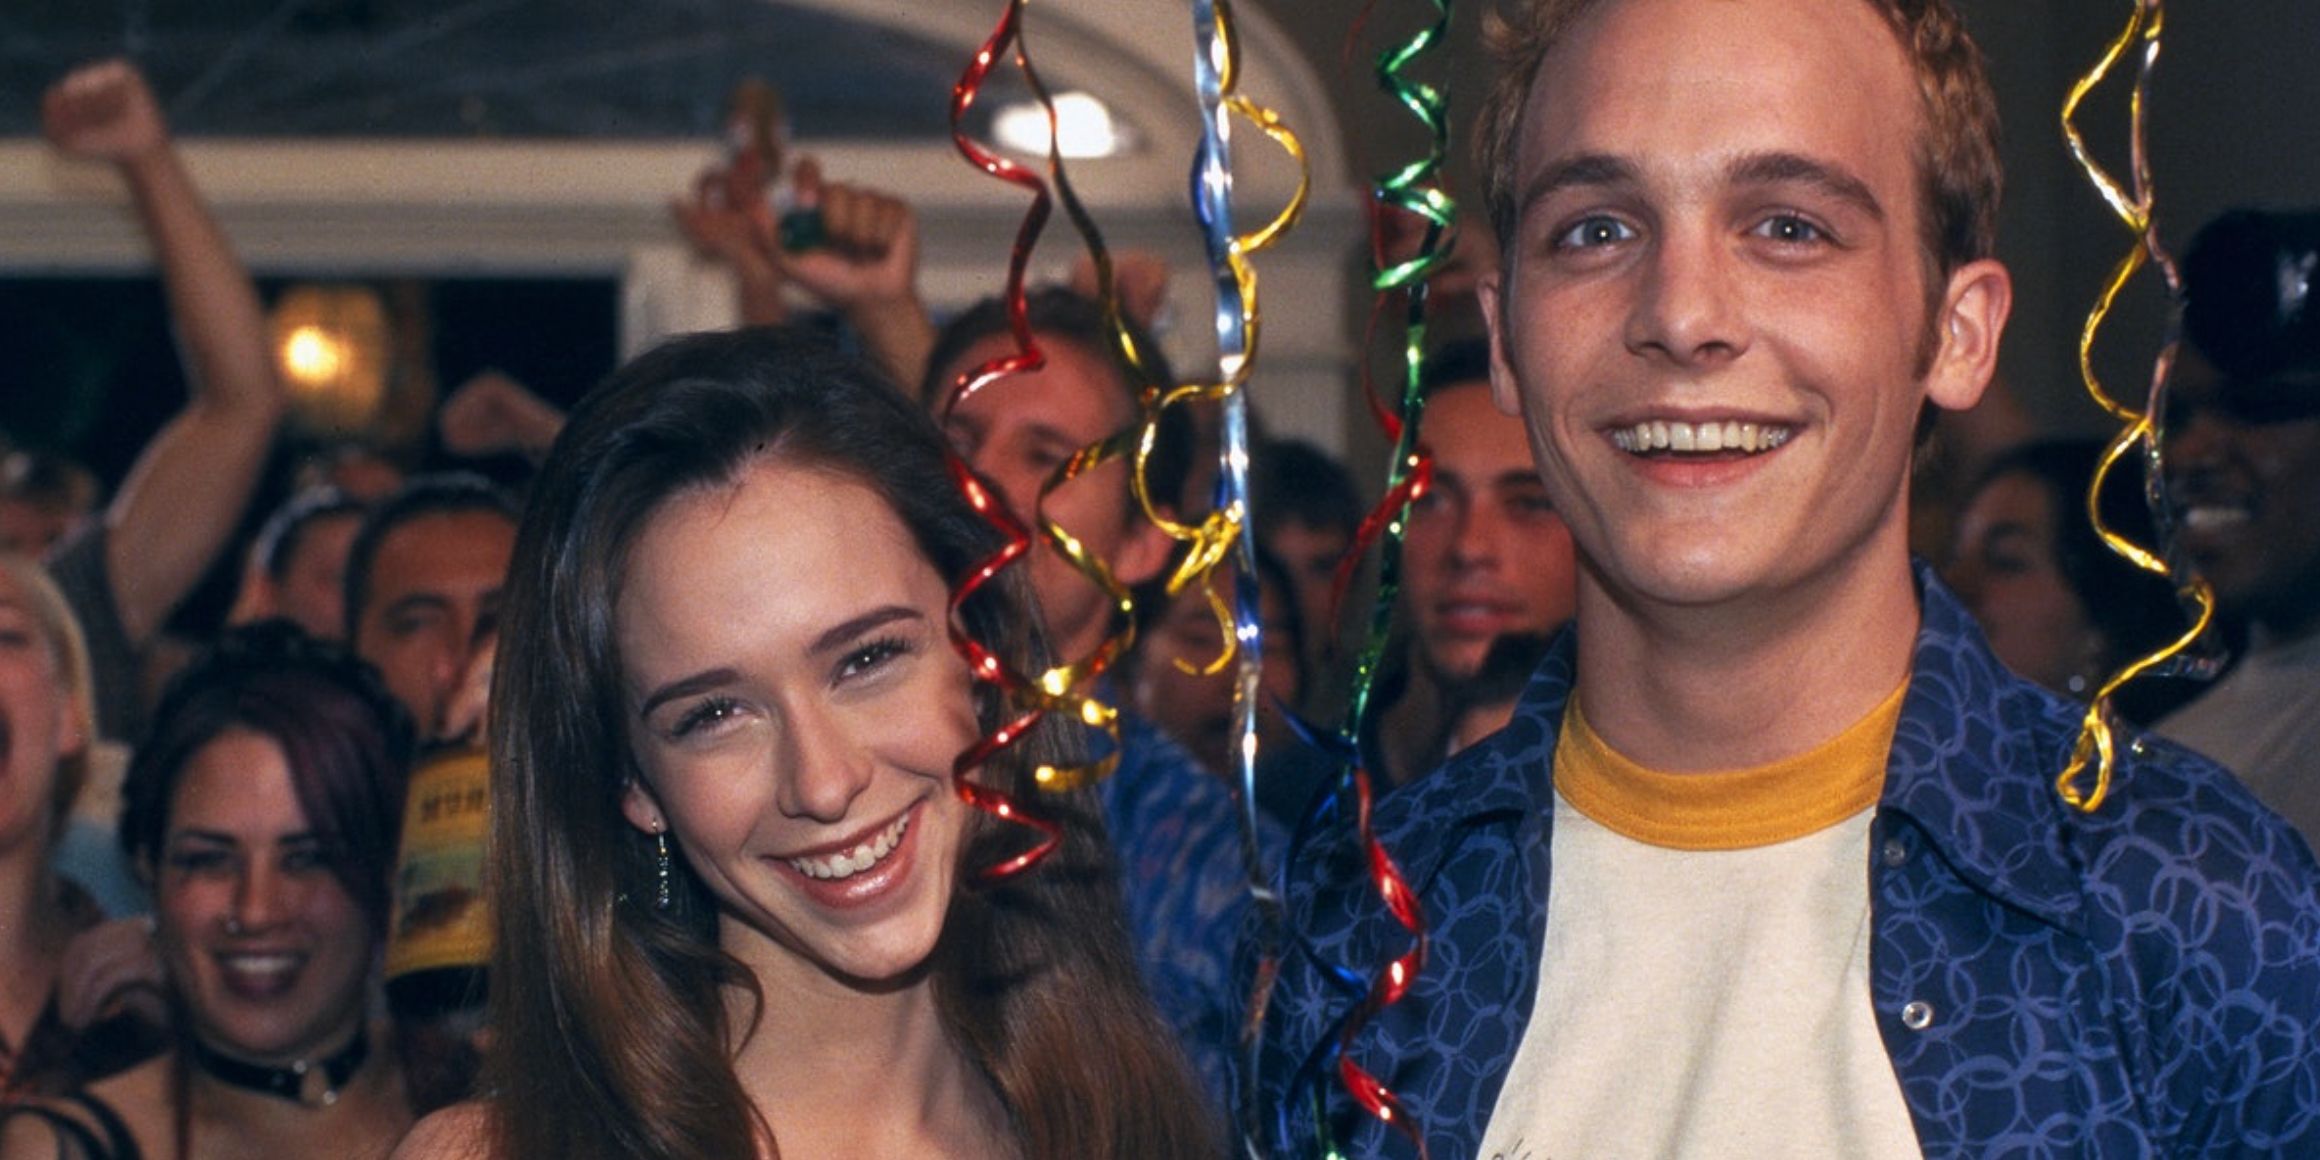 Amanda and Preston smile in the midst of a party in Cant Hardly Wait